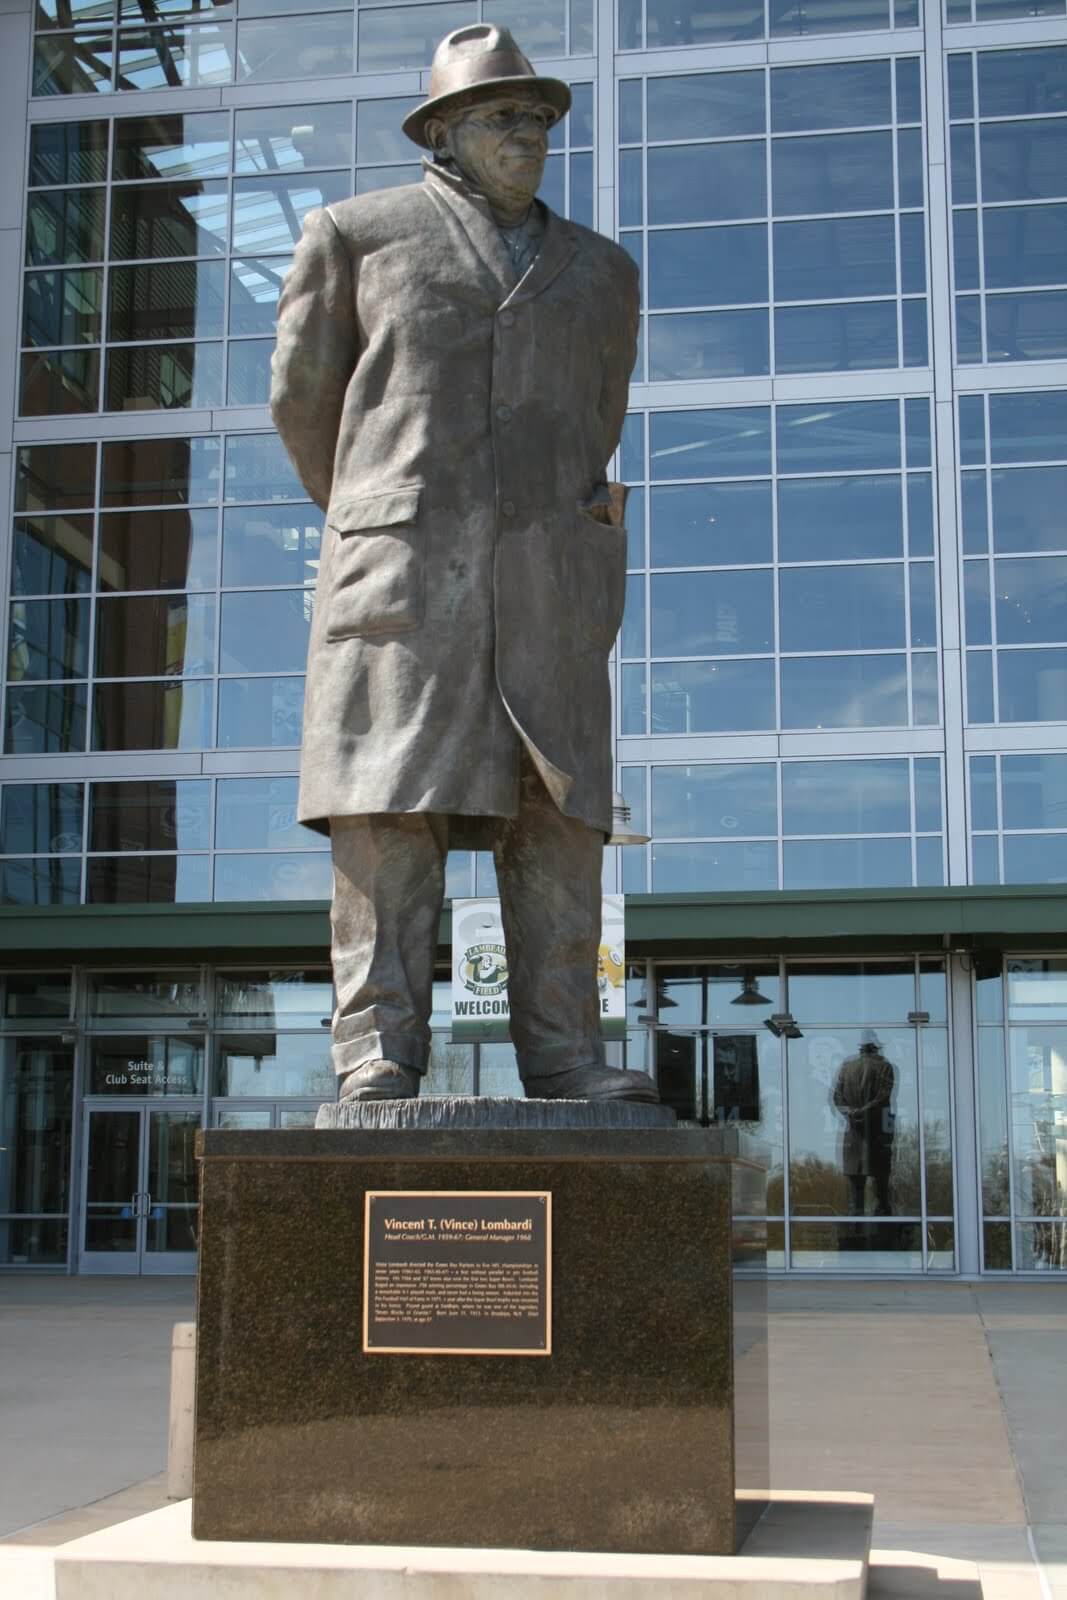 Vince Lombardi statue, Green Bay Packers